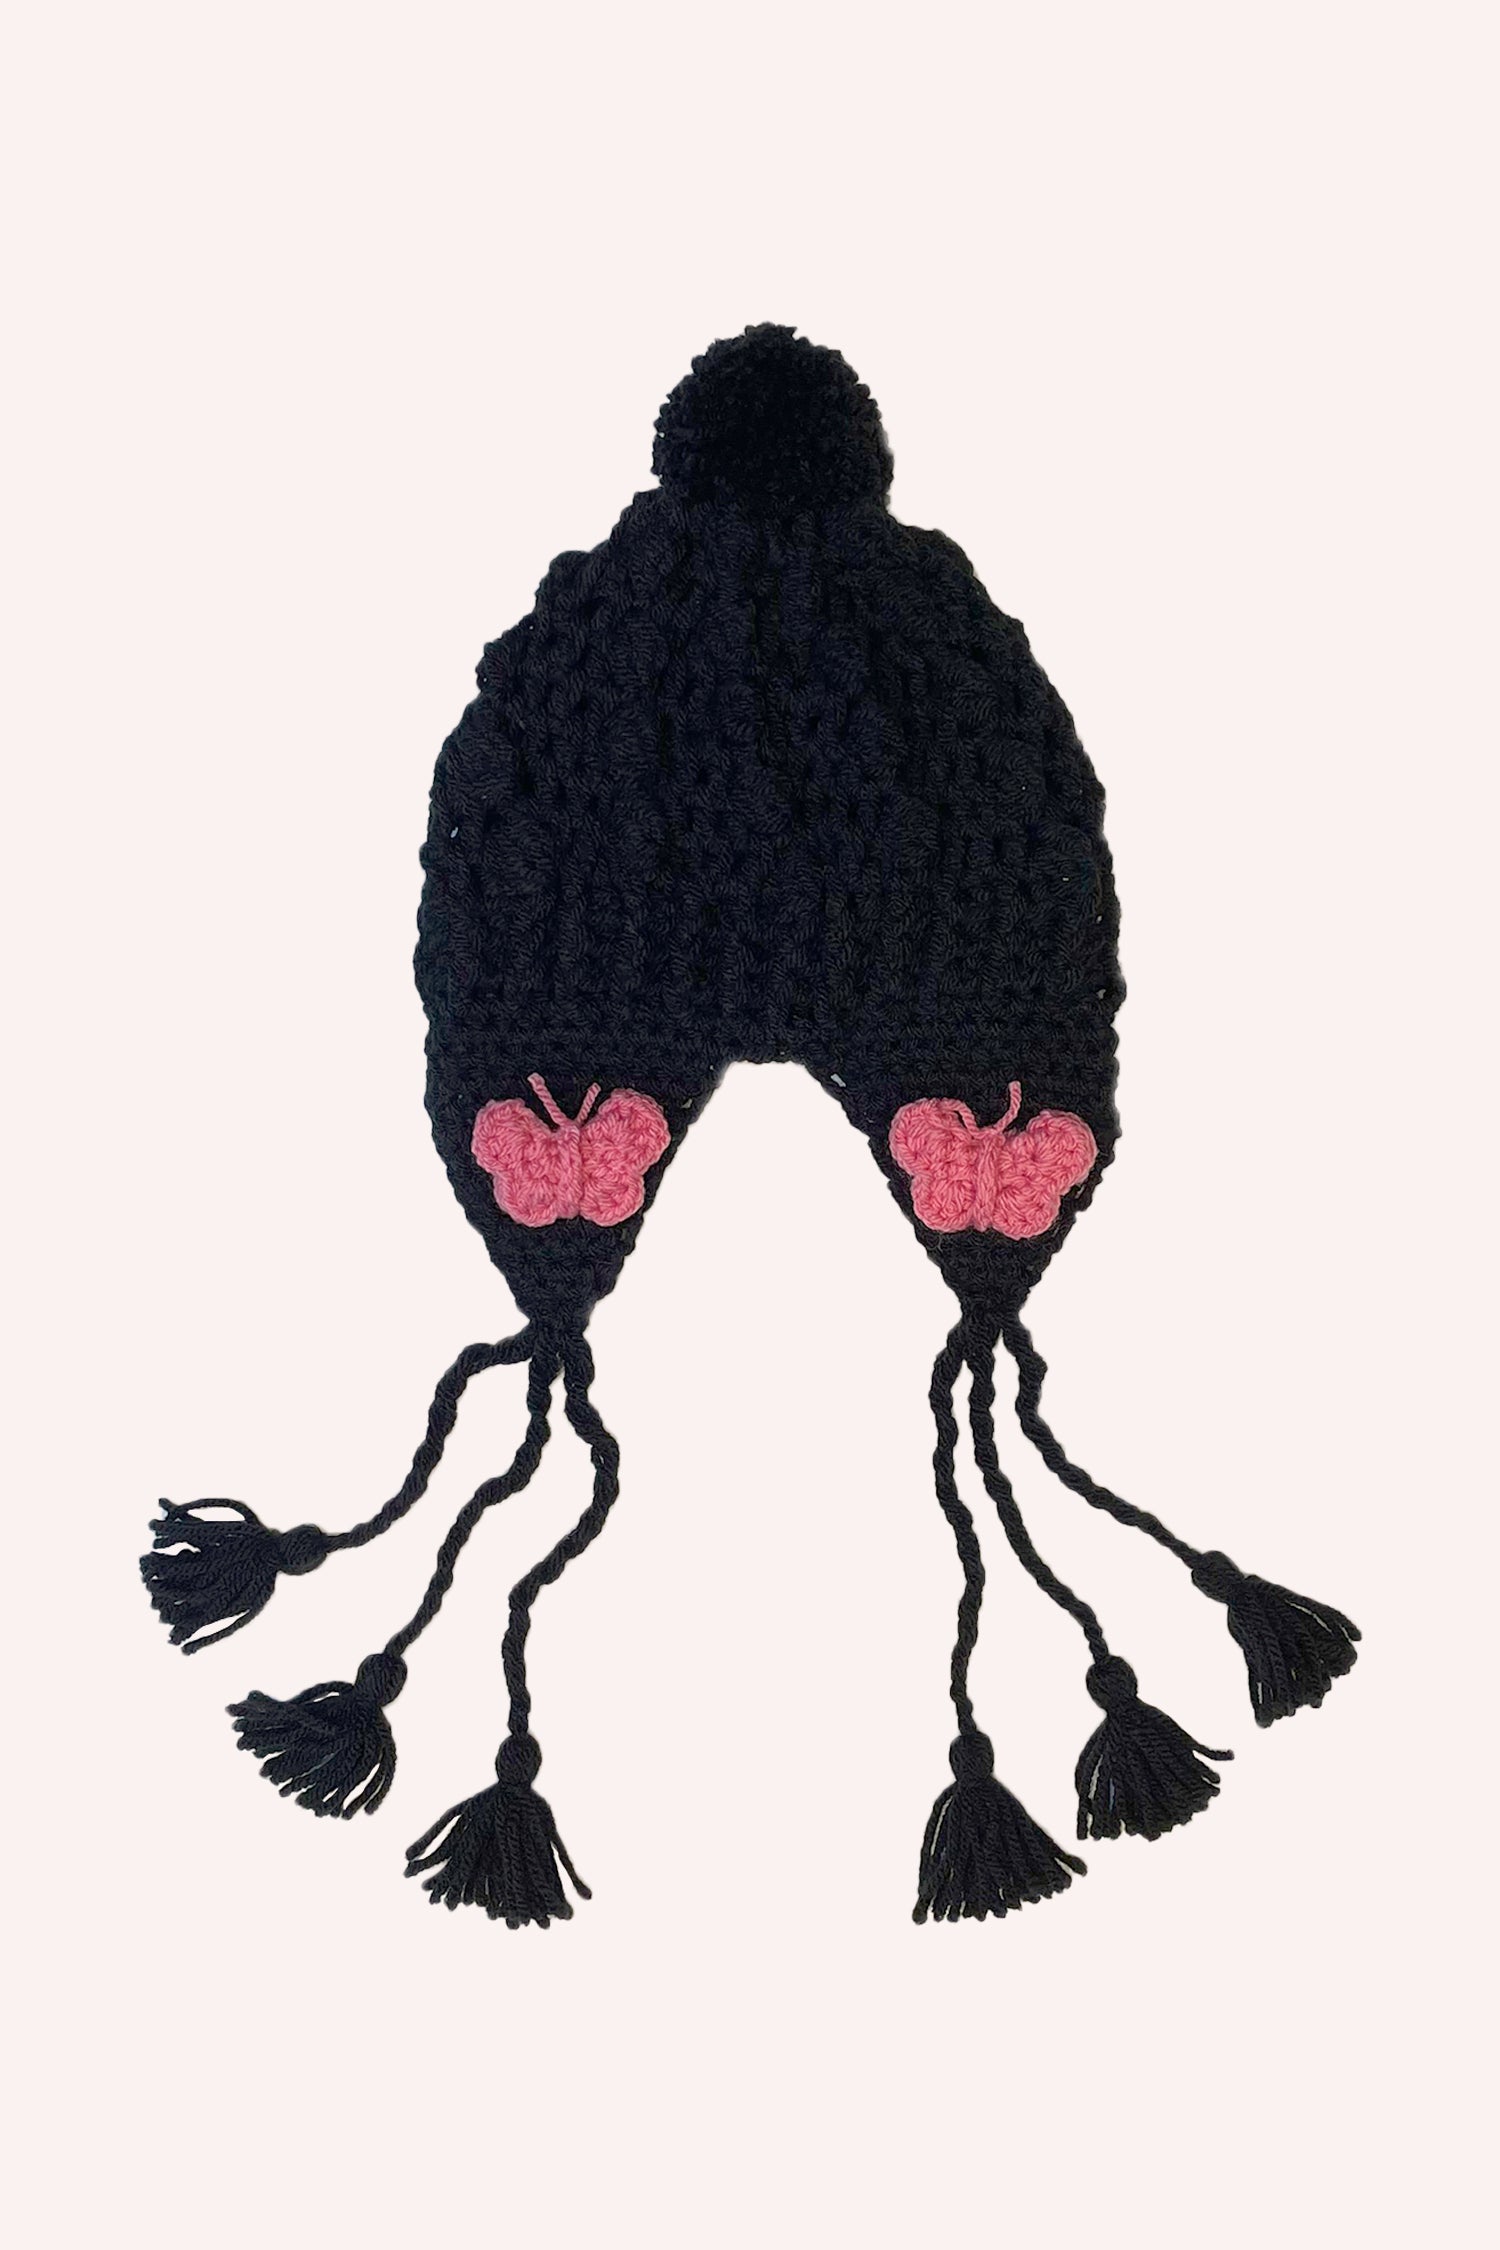 Black crochet hat, rose butterfly-shaped ear flaps, 3 strings on each side, bobbles at the ends